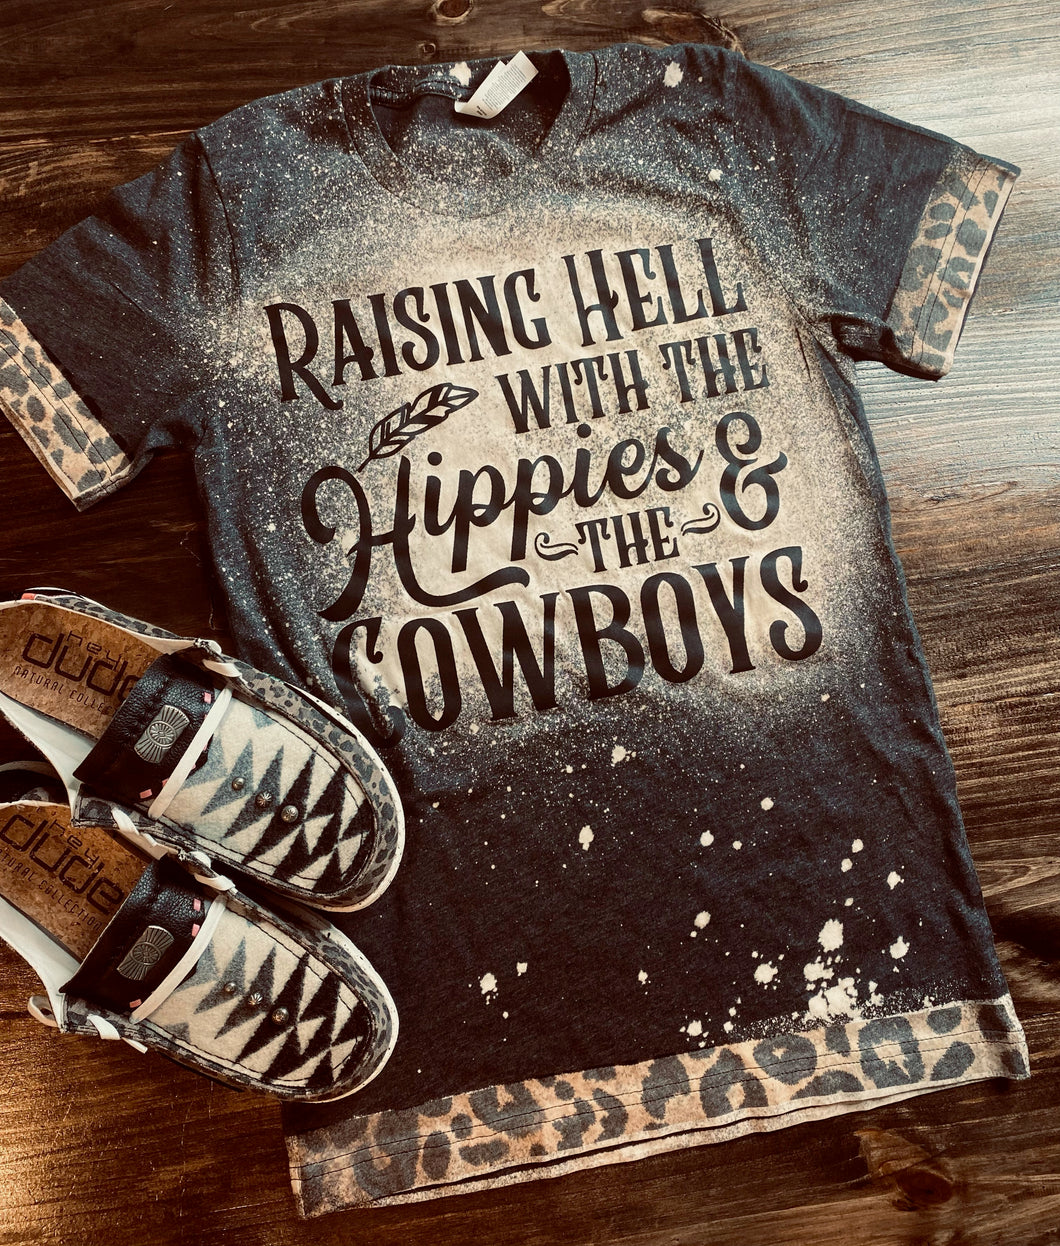 Raising Hell with the Hippies and Cowboys leopard trim bleached graphic tee - Mavictoria Designs Hot Press Express